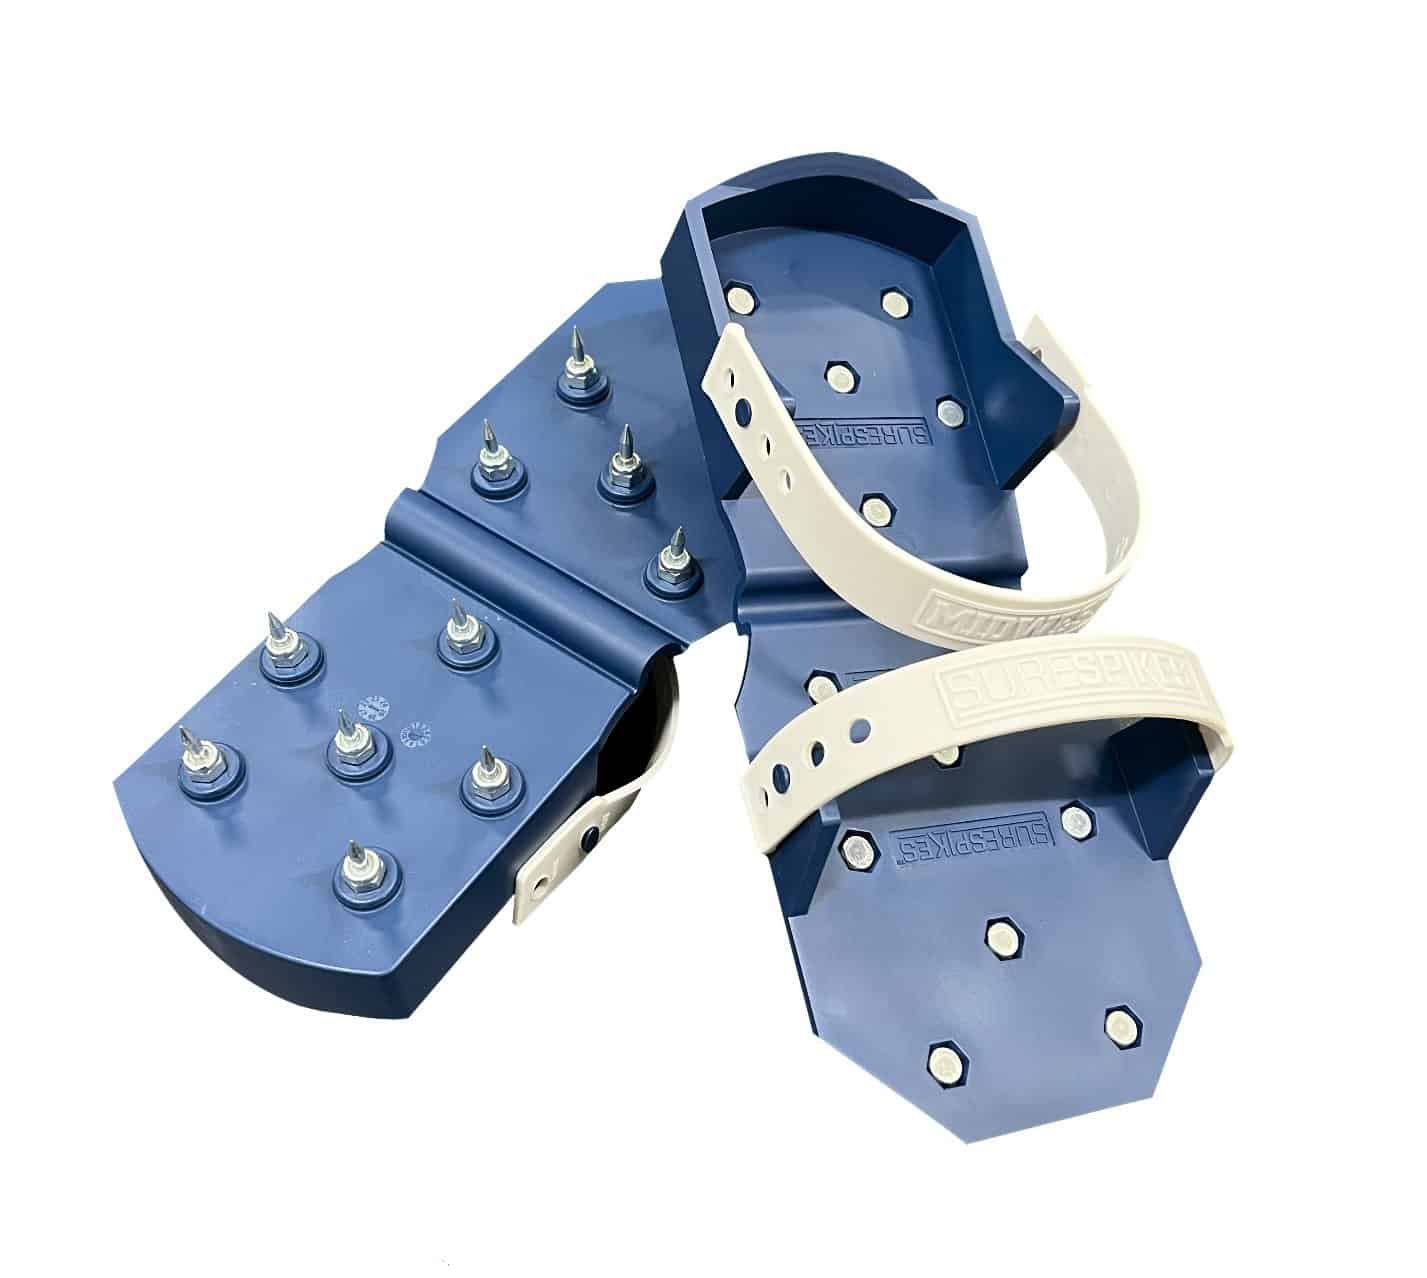 SureSpikes spiked shoe